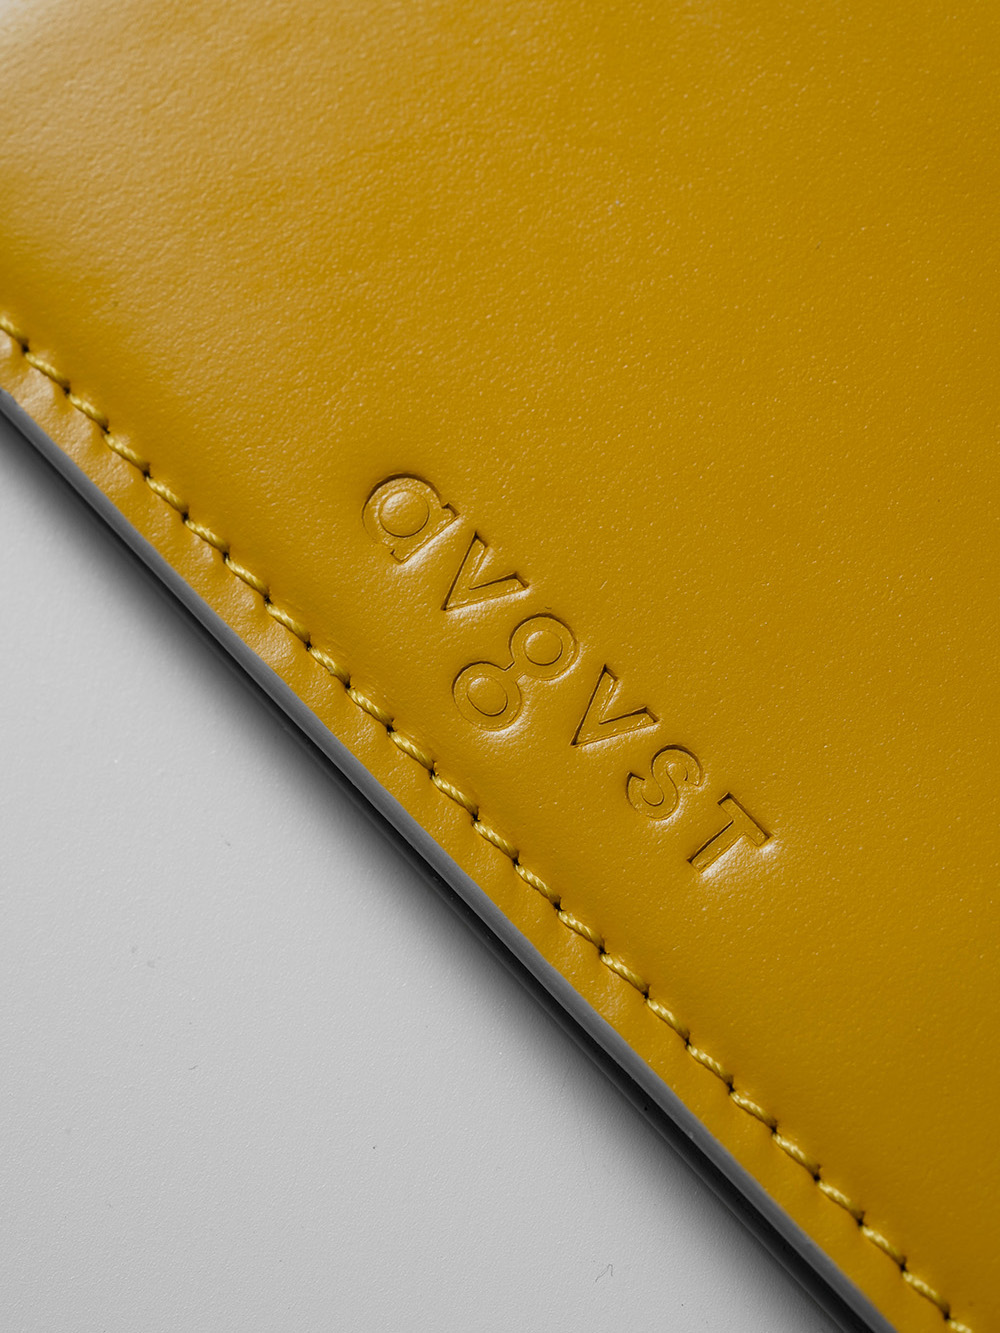 YELLOW LEATHER CARDHOLDER  